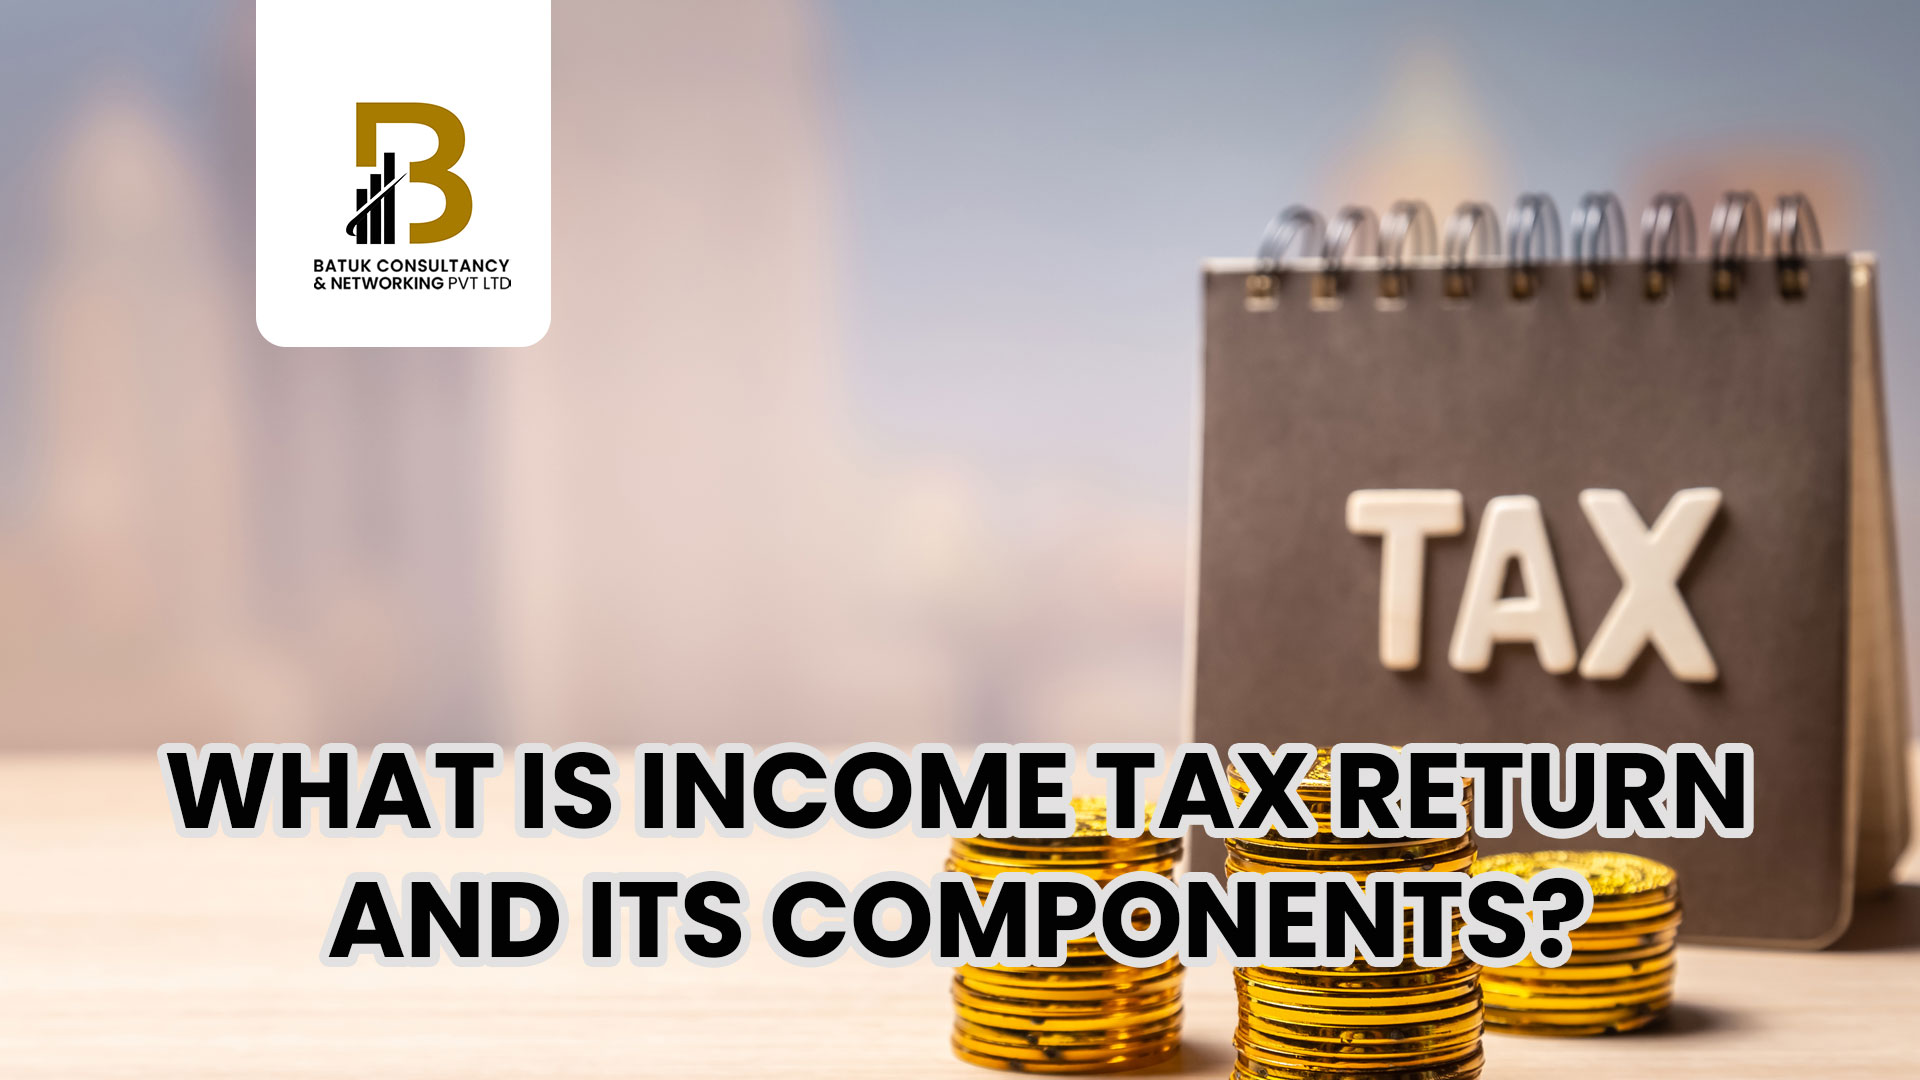 What is income tax return and its components?